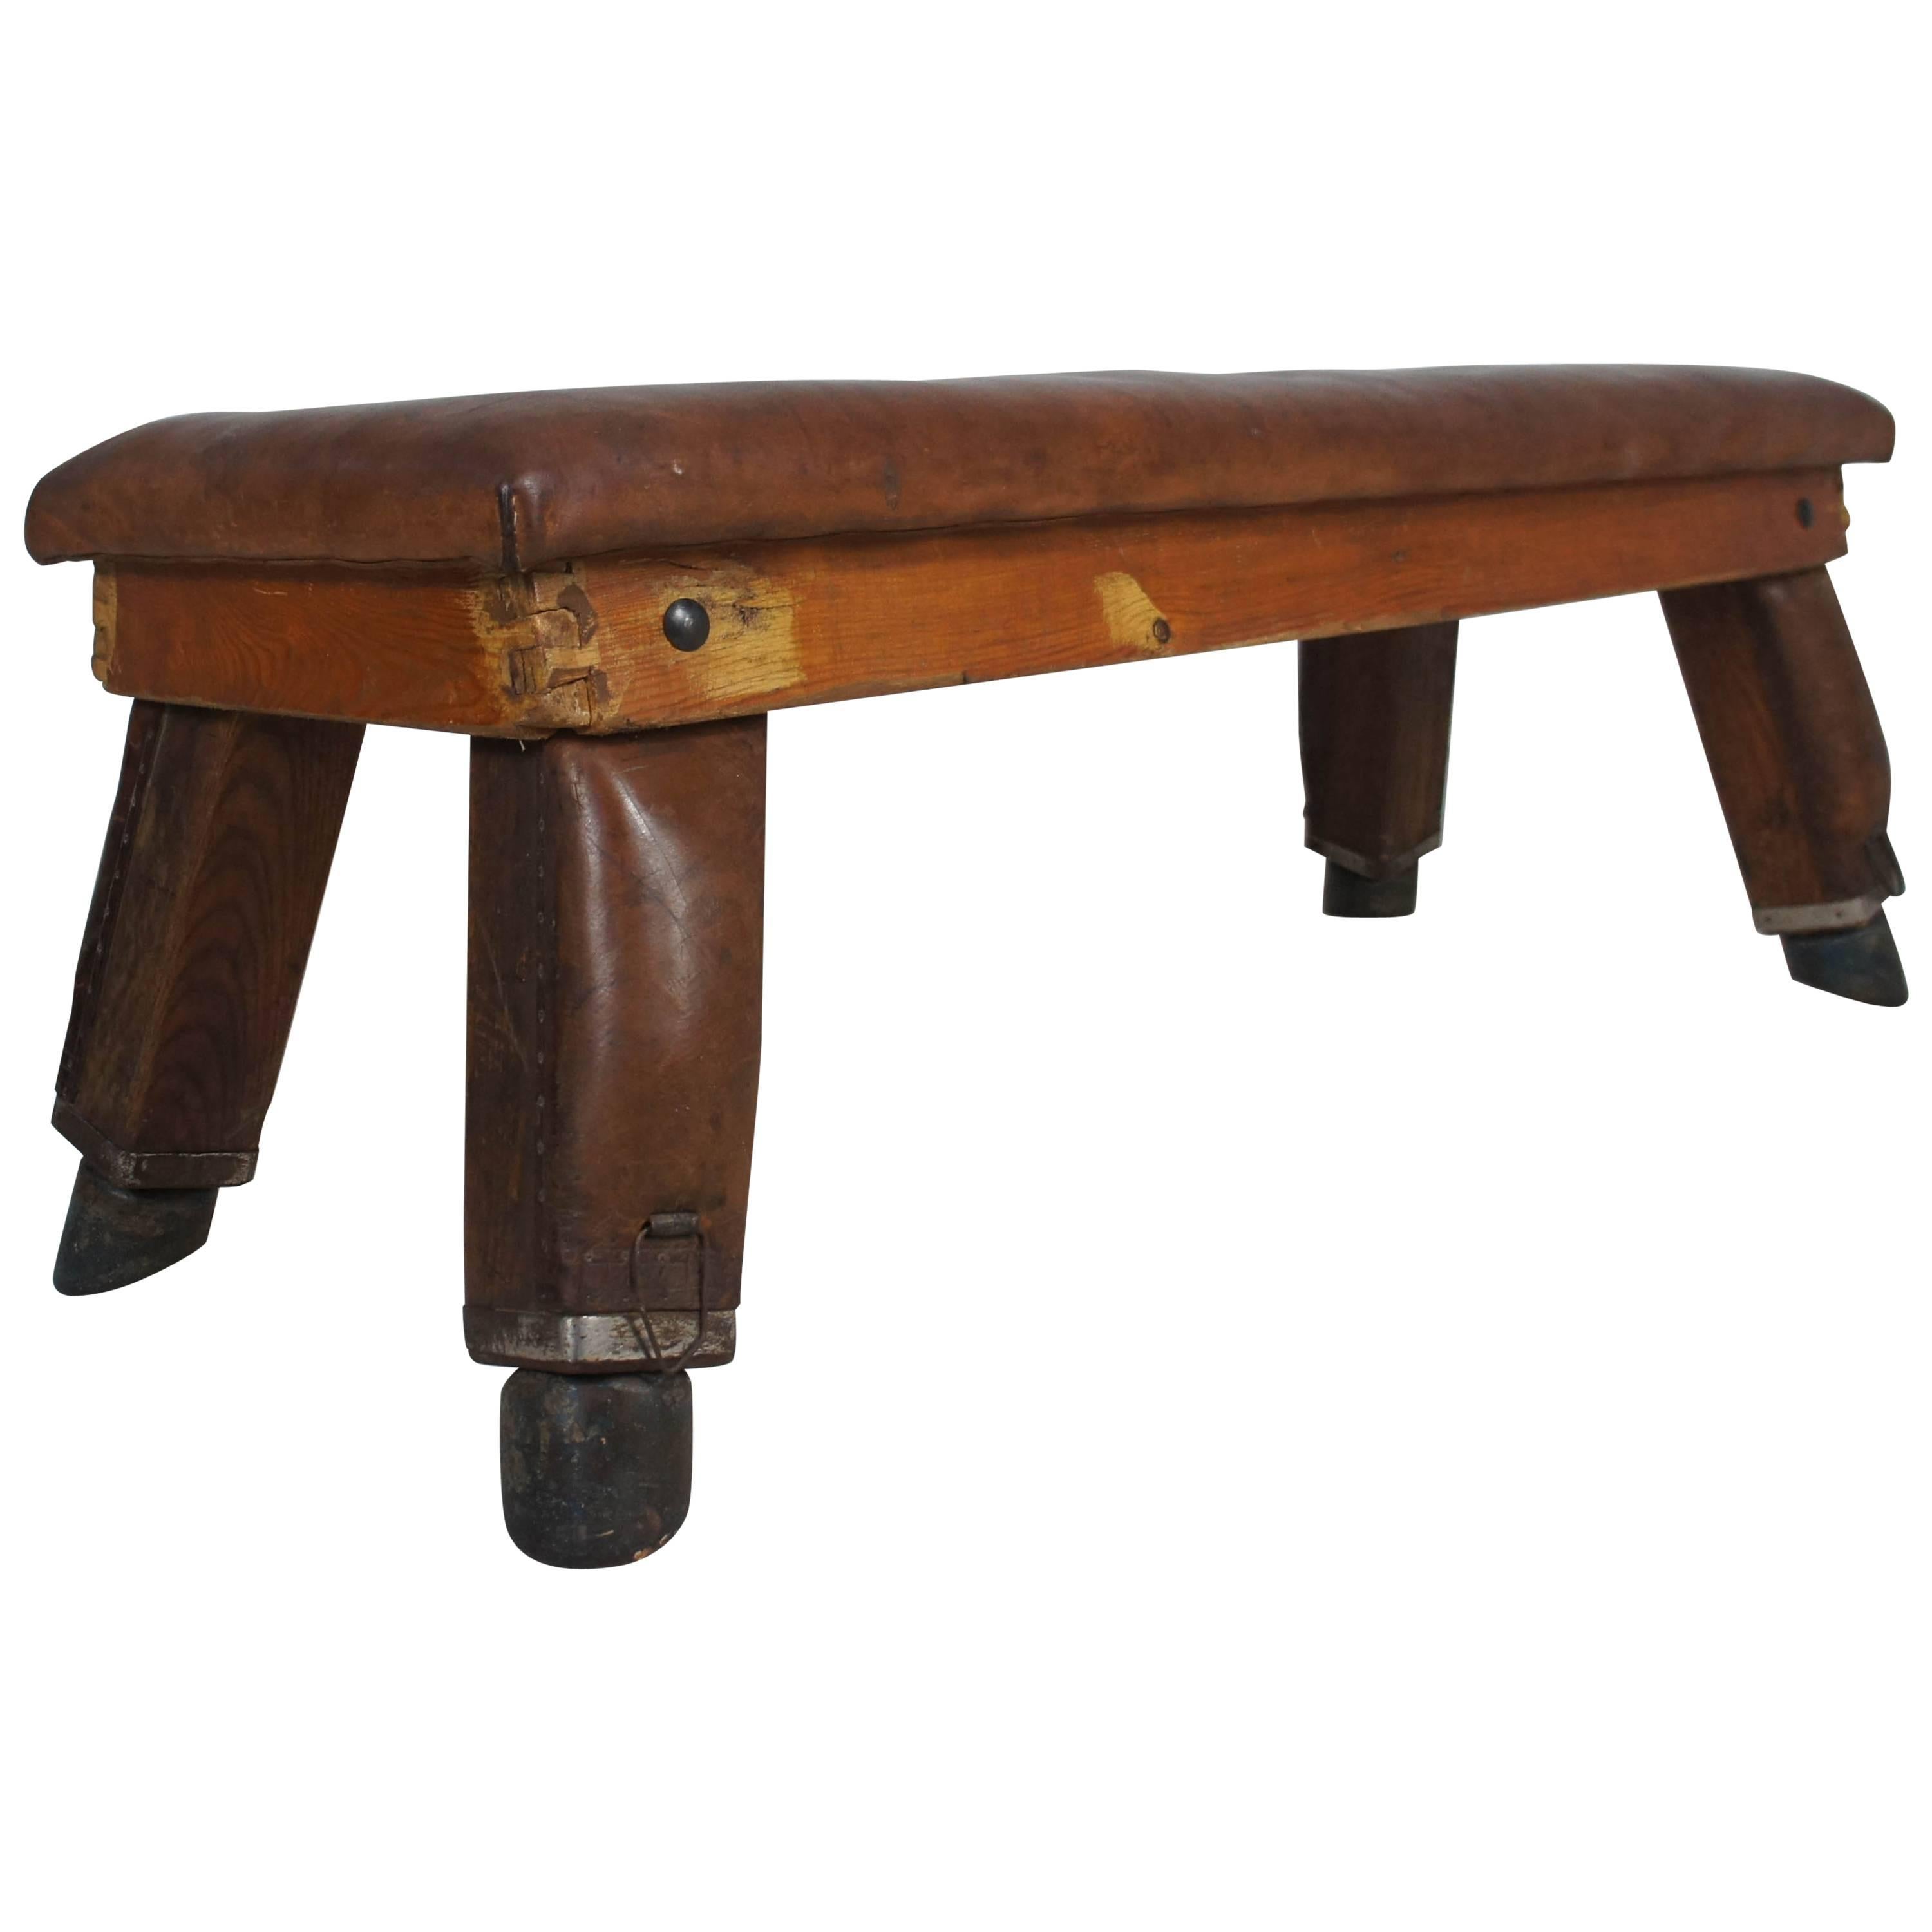 Midcentury Vintage Leather Gym Bench from Germany